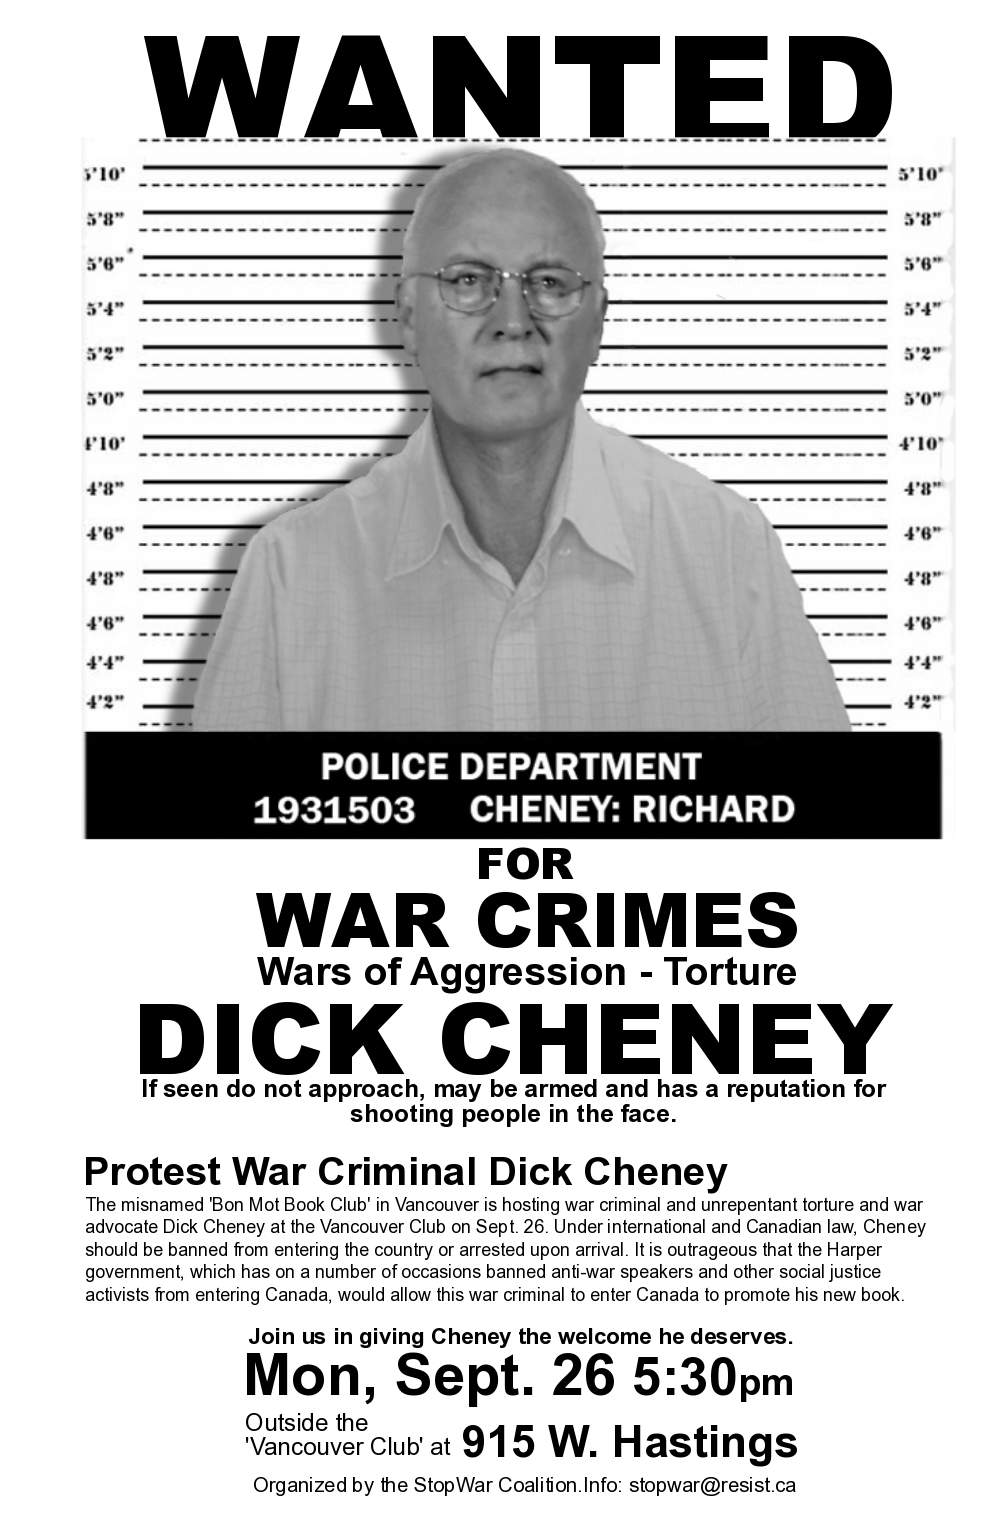 CheneyWanted2011Poster